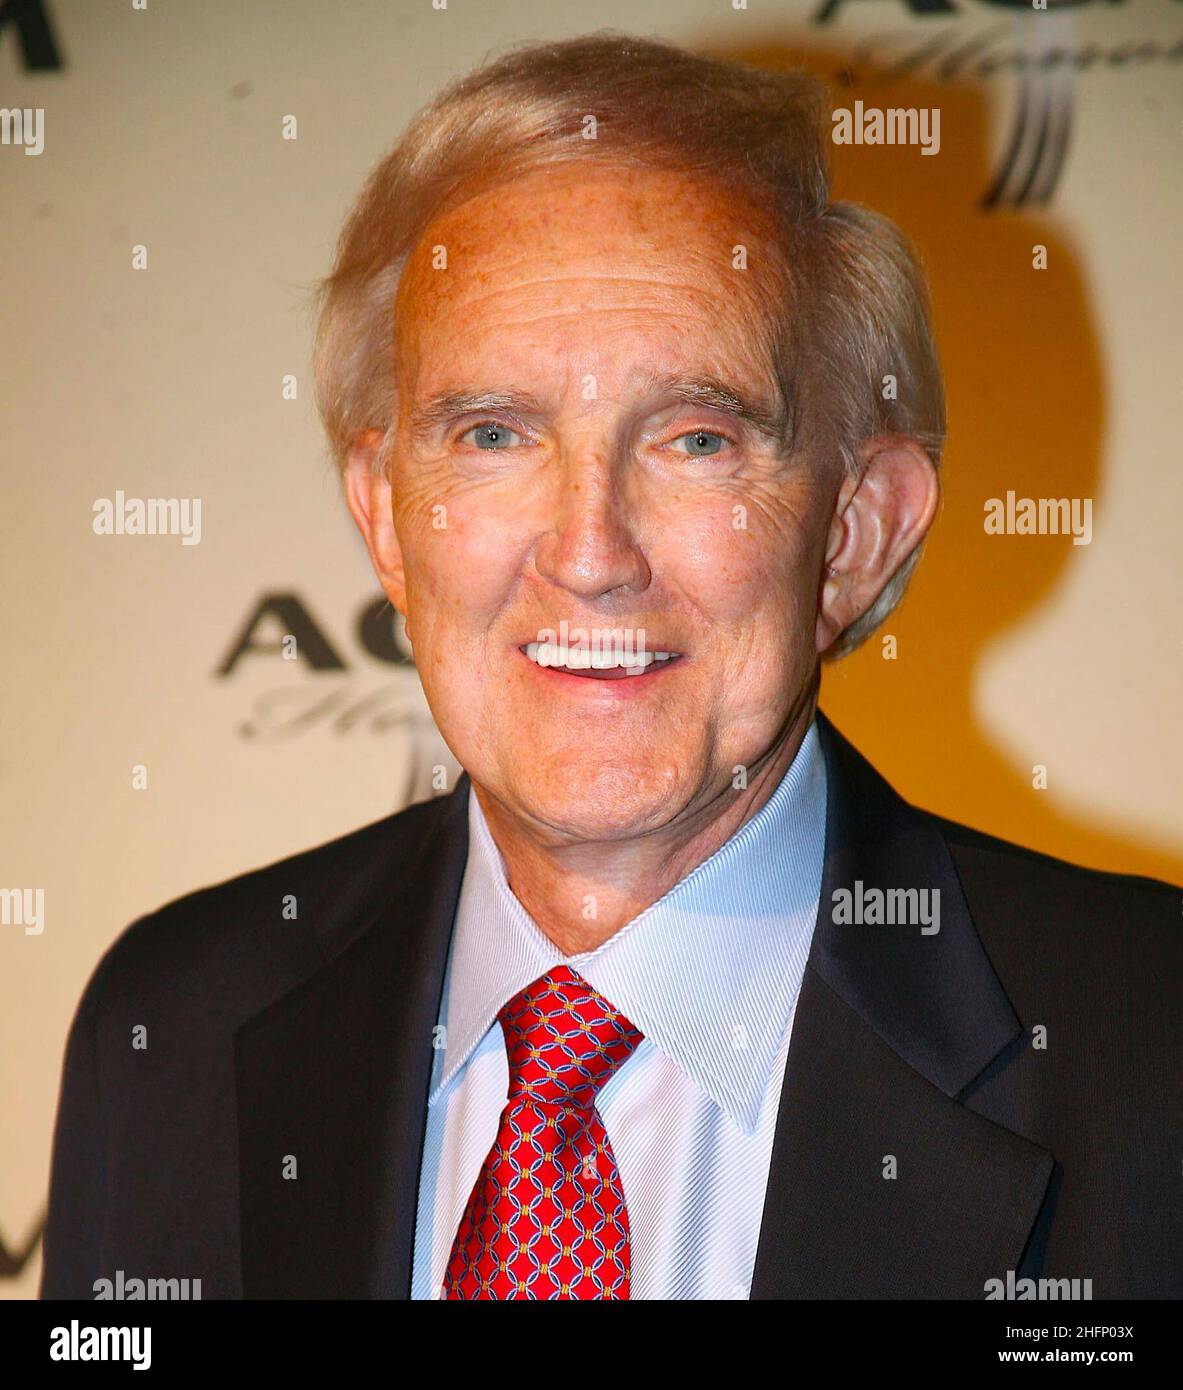 January 17, 2022: RALPH EMERY, a legendary radio and television personality in the world of country music, died Saturday at the age of 88, according to the Country Music Association. FILE PHOTO SHOT ON: September 18, 2008, Nashville, TENNESSEE, USA: Ralph Emery attends the Academy of Country Music Honors an evening dedicated to recognizing the special honorees and non-televised category winners from the 43rd Annual Academy of Country Music Awards held at the Musicians Hall of Fame.  (Credit Image: © Randi Radcliff/AdMedia via ZUMA Wire) Stock Photo